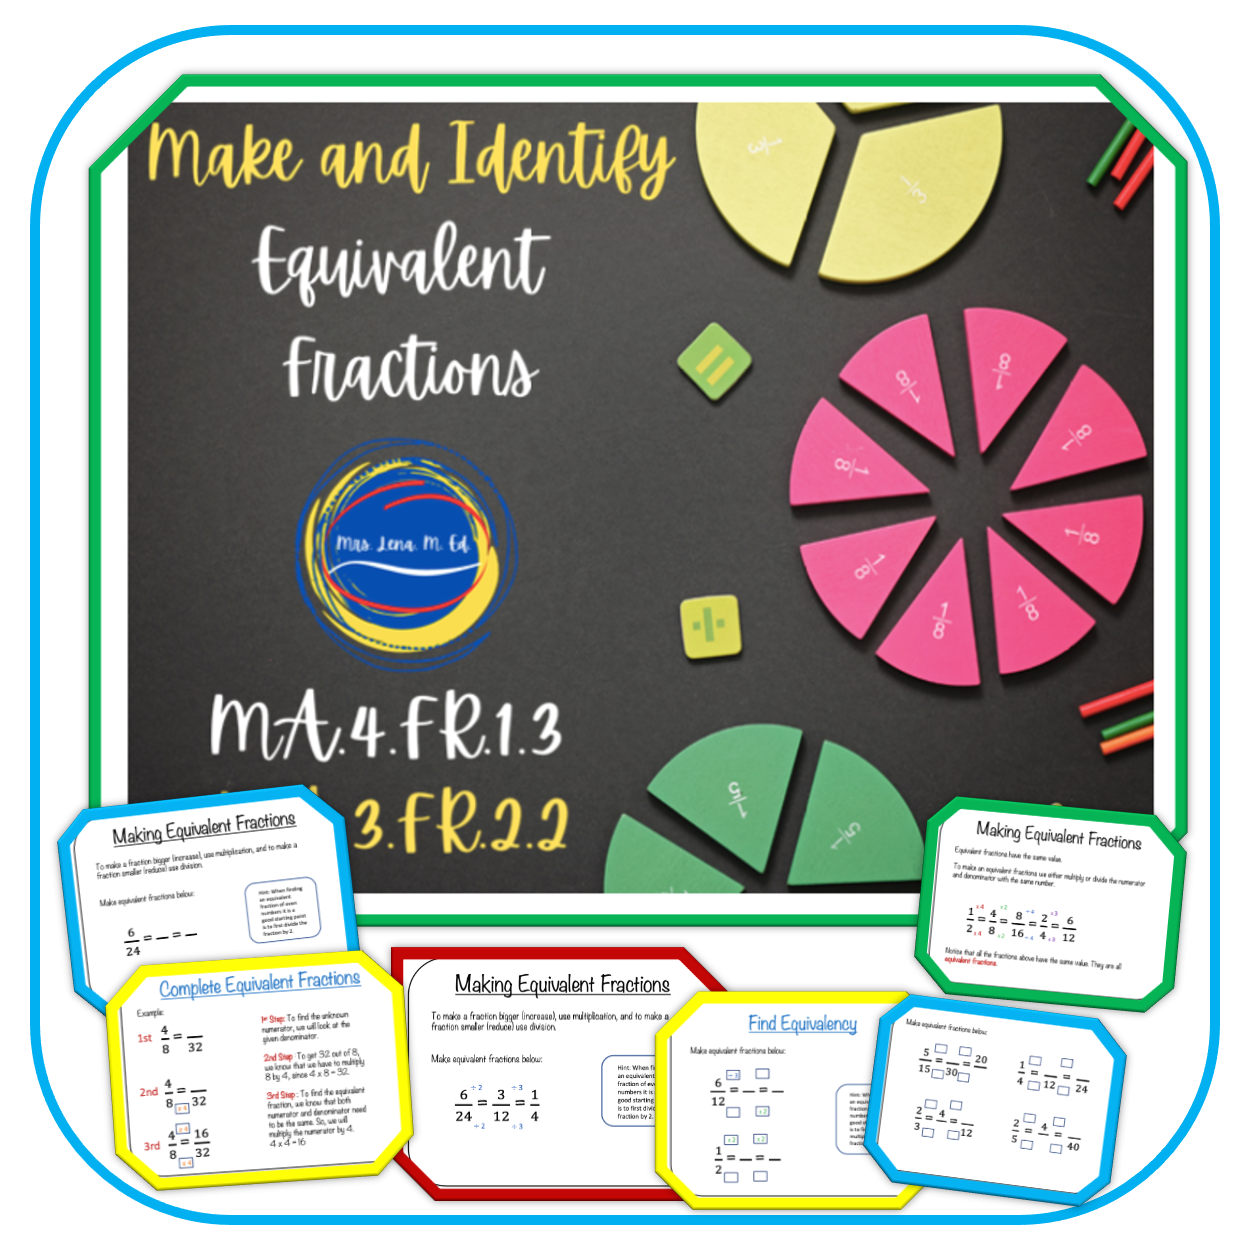 Composing and Identifying Equivalent Fractions MA.4.FR.1.3 and MA.3.FR.2.2